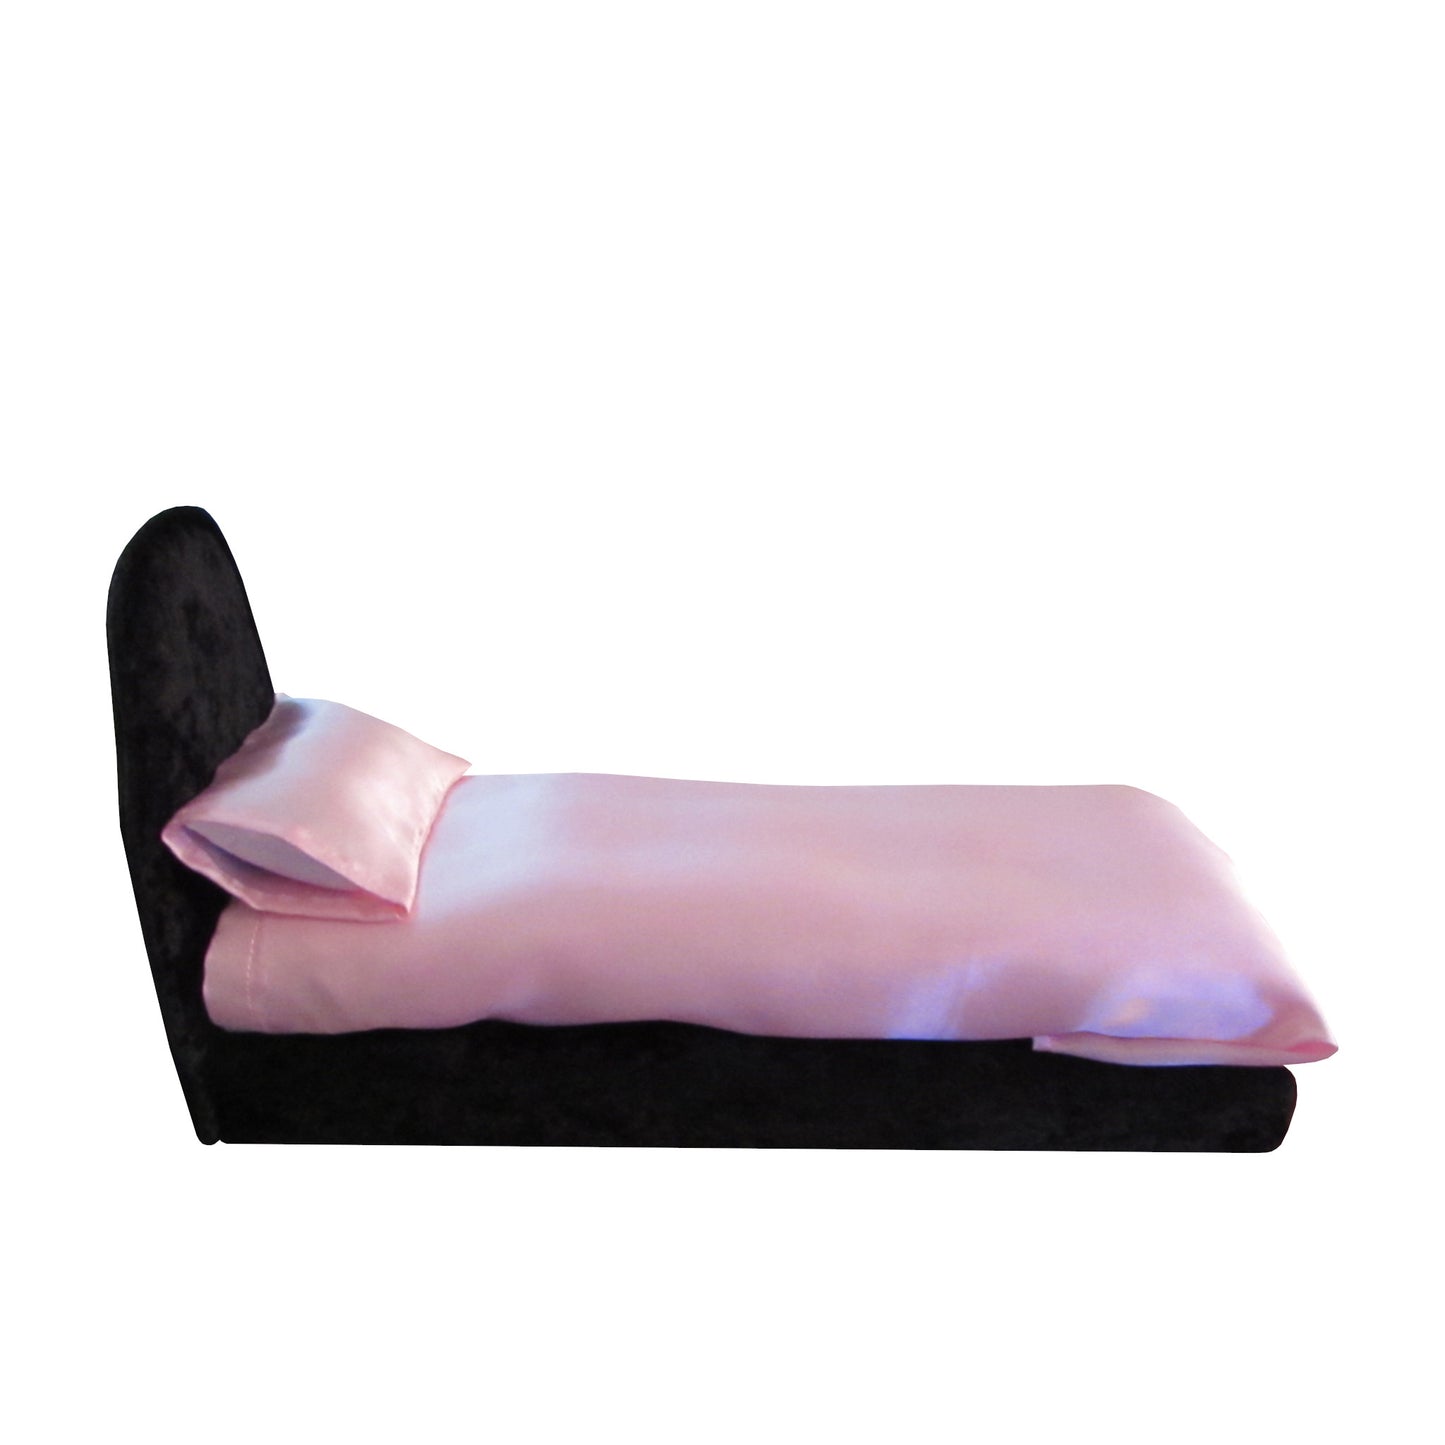 Light Pink Satin Fitted, Flat Sheet, and Pillowcase with Black Crushed Velvet Doll Bed for 11.5-inch and 12-inch dolls Side view